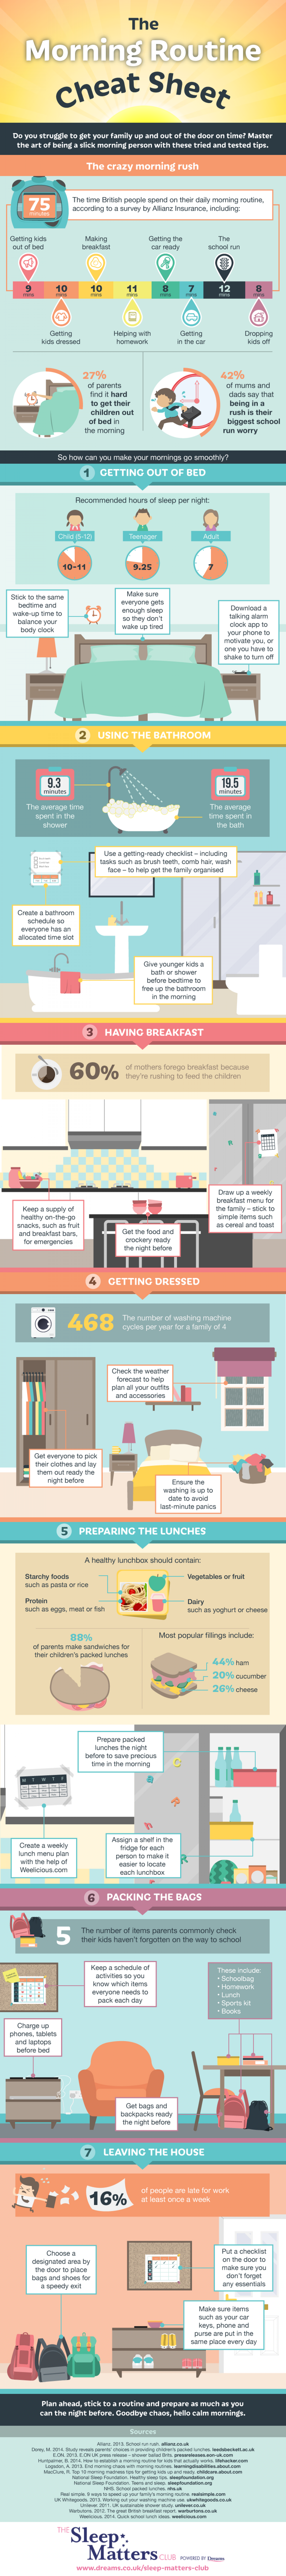 The Morning Routine Cheat Sheet  Infographic